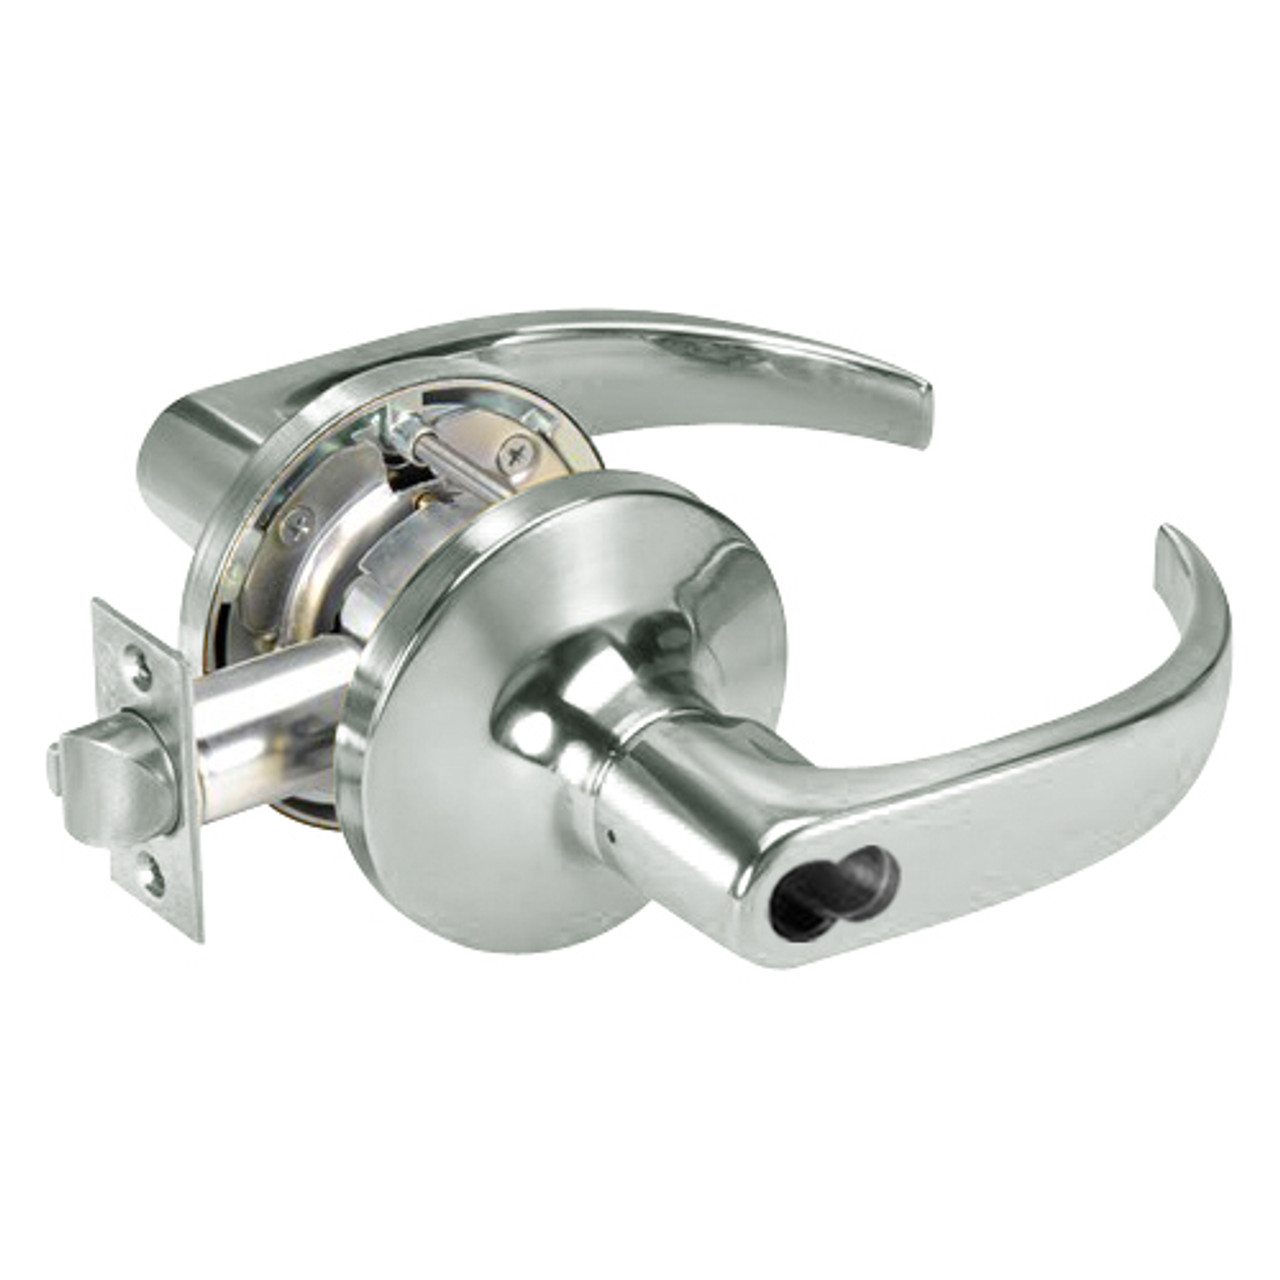 B-PB5407LN-619 Yale 5400LN Series Single Cylinder Entry Cylindrical Locks with Pacific Beach Lever Prepped for SFIC in Satin Nickel